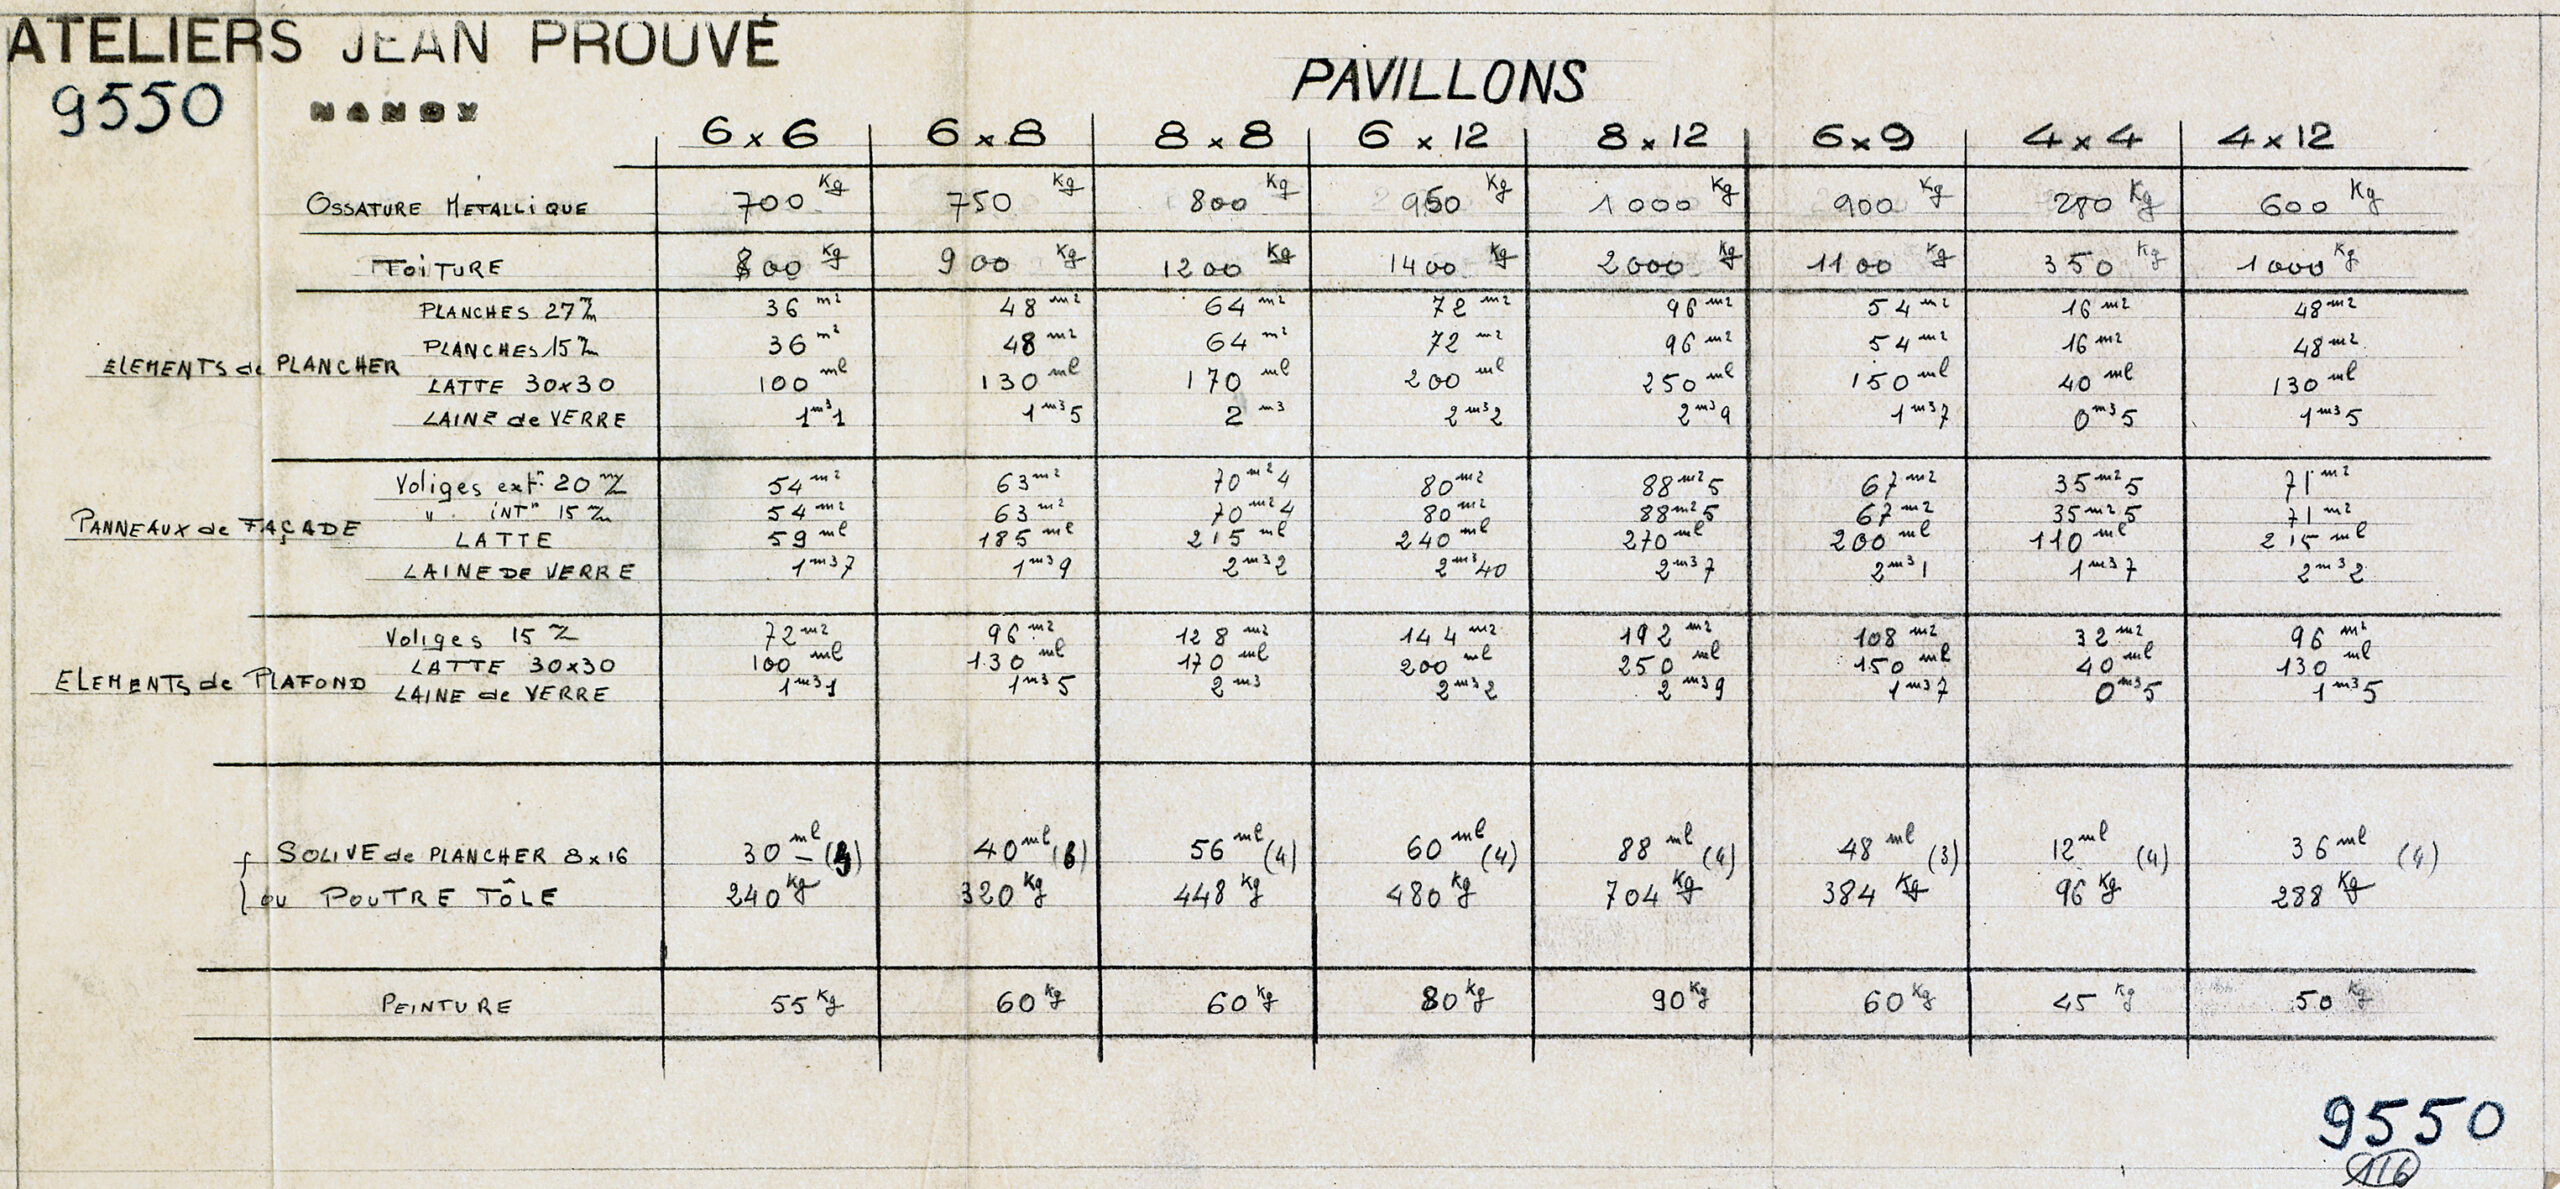 Ateliers Jean Prouvé. “Pavilions”, nomenclature and unit weight and volume of elements making up the different types of demountable pavilions, document no. 9550, 19 January 1945.